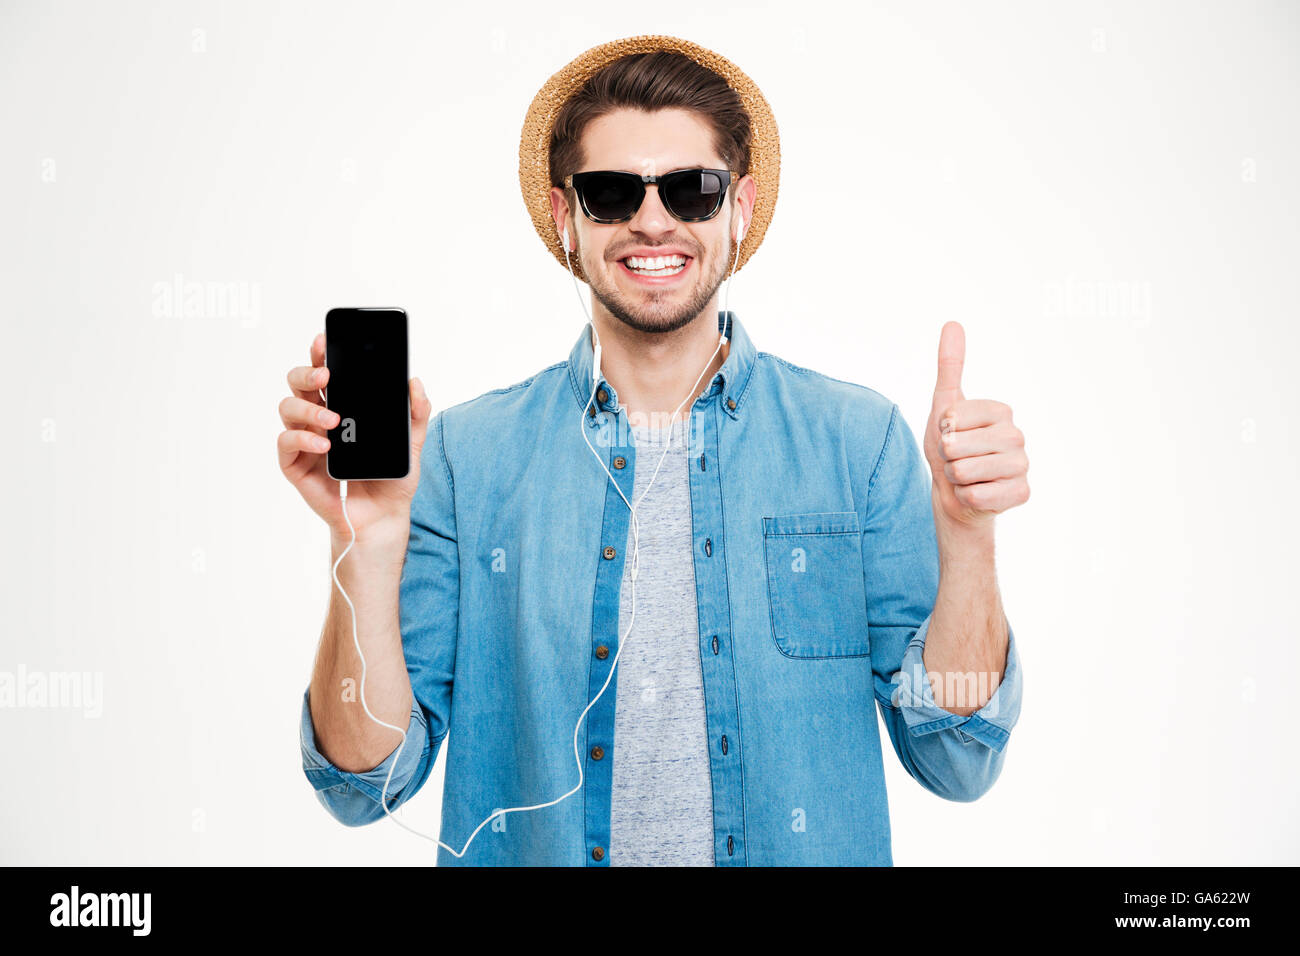 Cheerful young man in earphones showing blank screen cell phone and showing thumbs up over white background Stock Photo